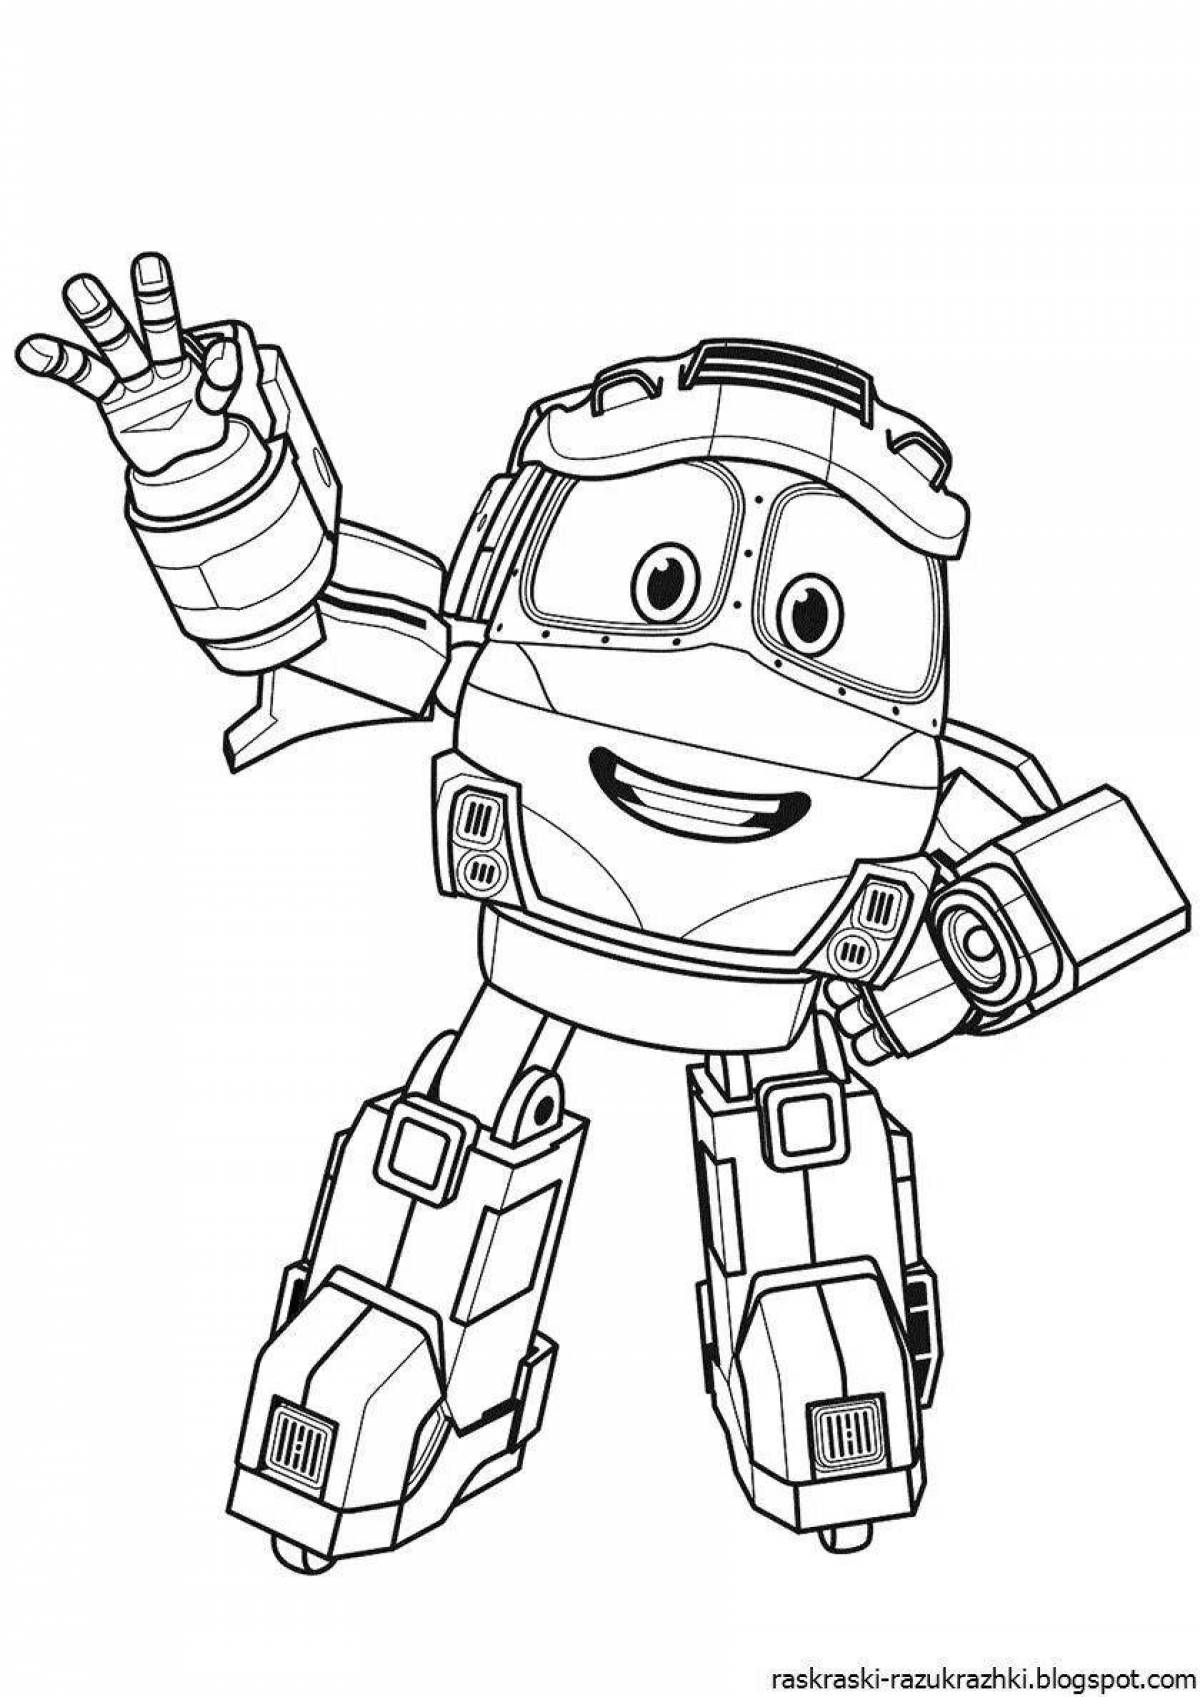 Coloring page happy tobots for kids